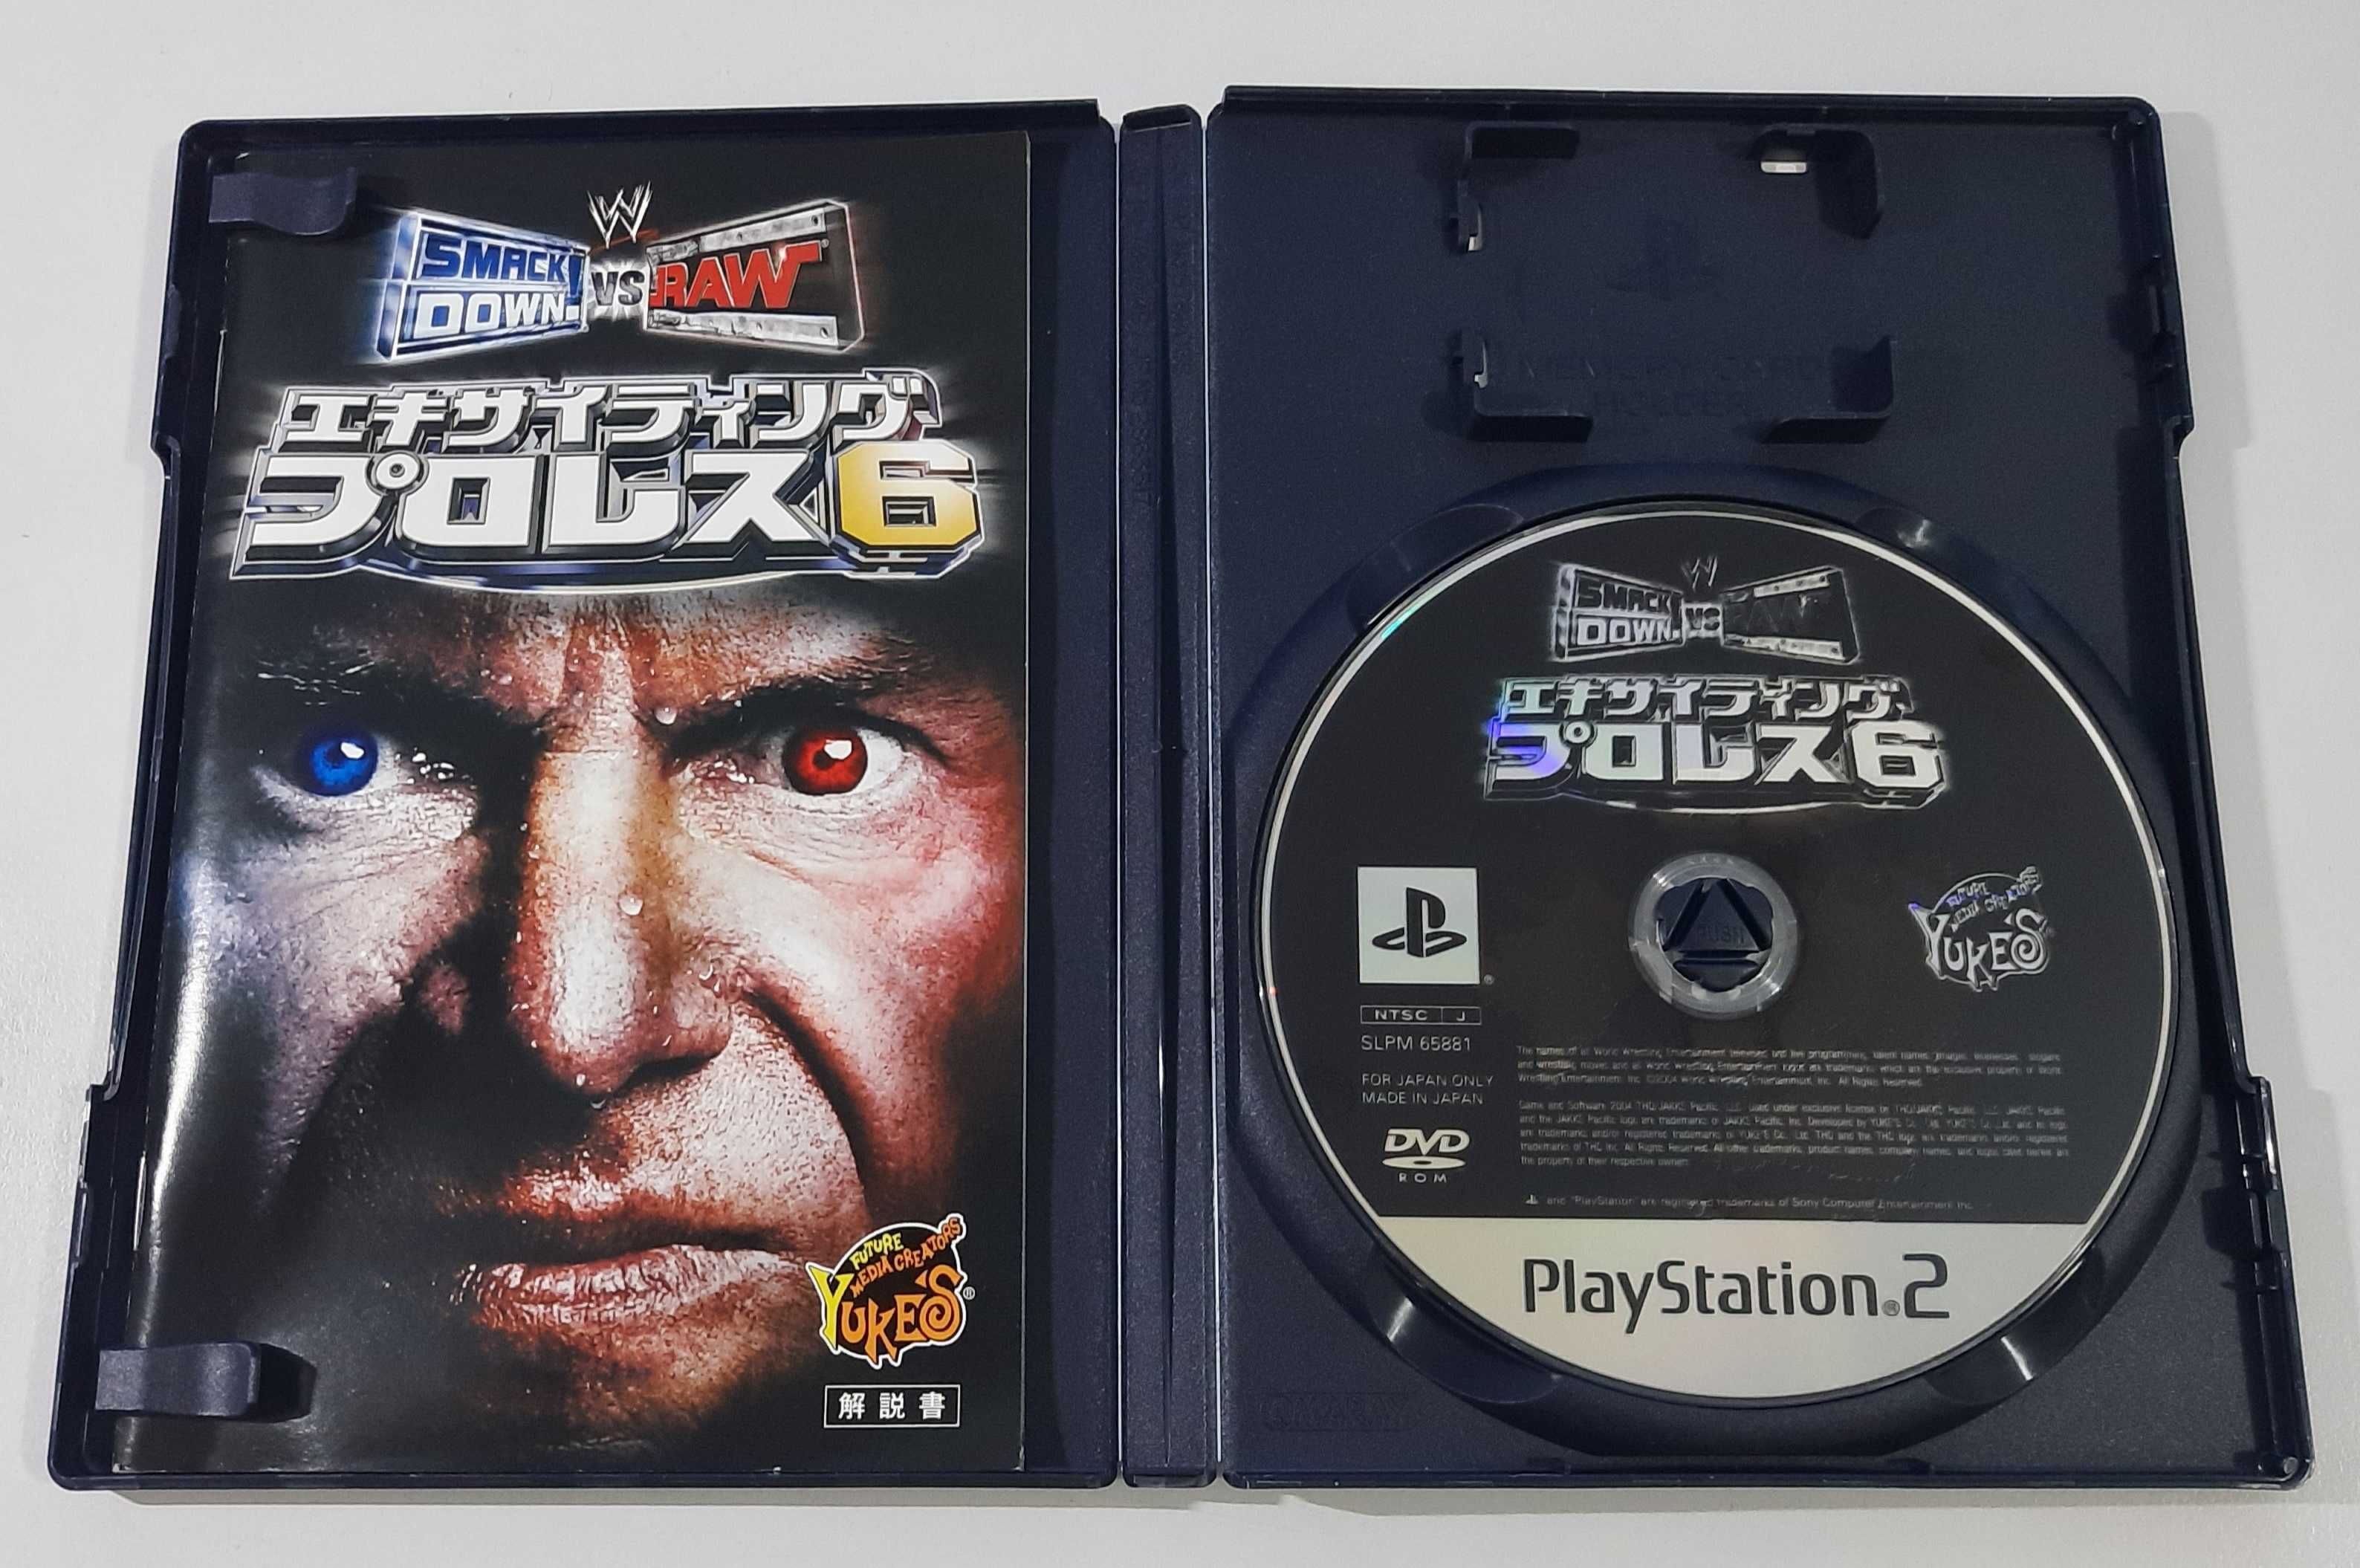 Exciting Pro Wres 6: WWE SmackDown! vs. Raw / PS2 [NTSC-J]